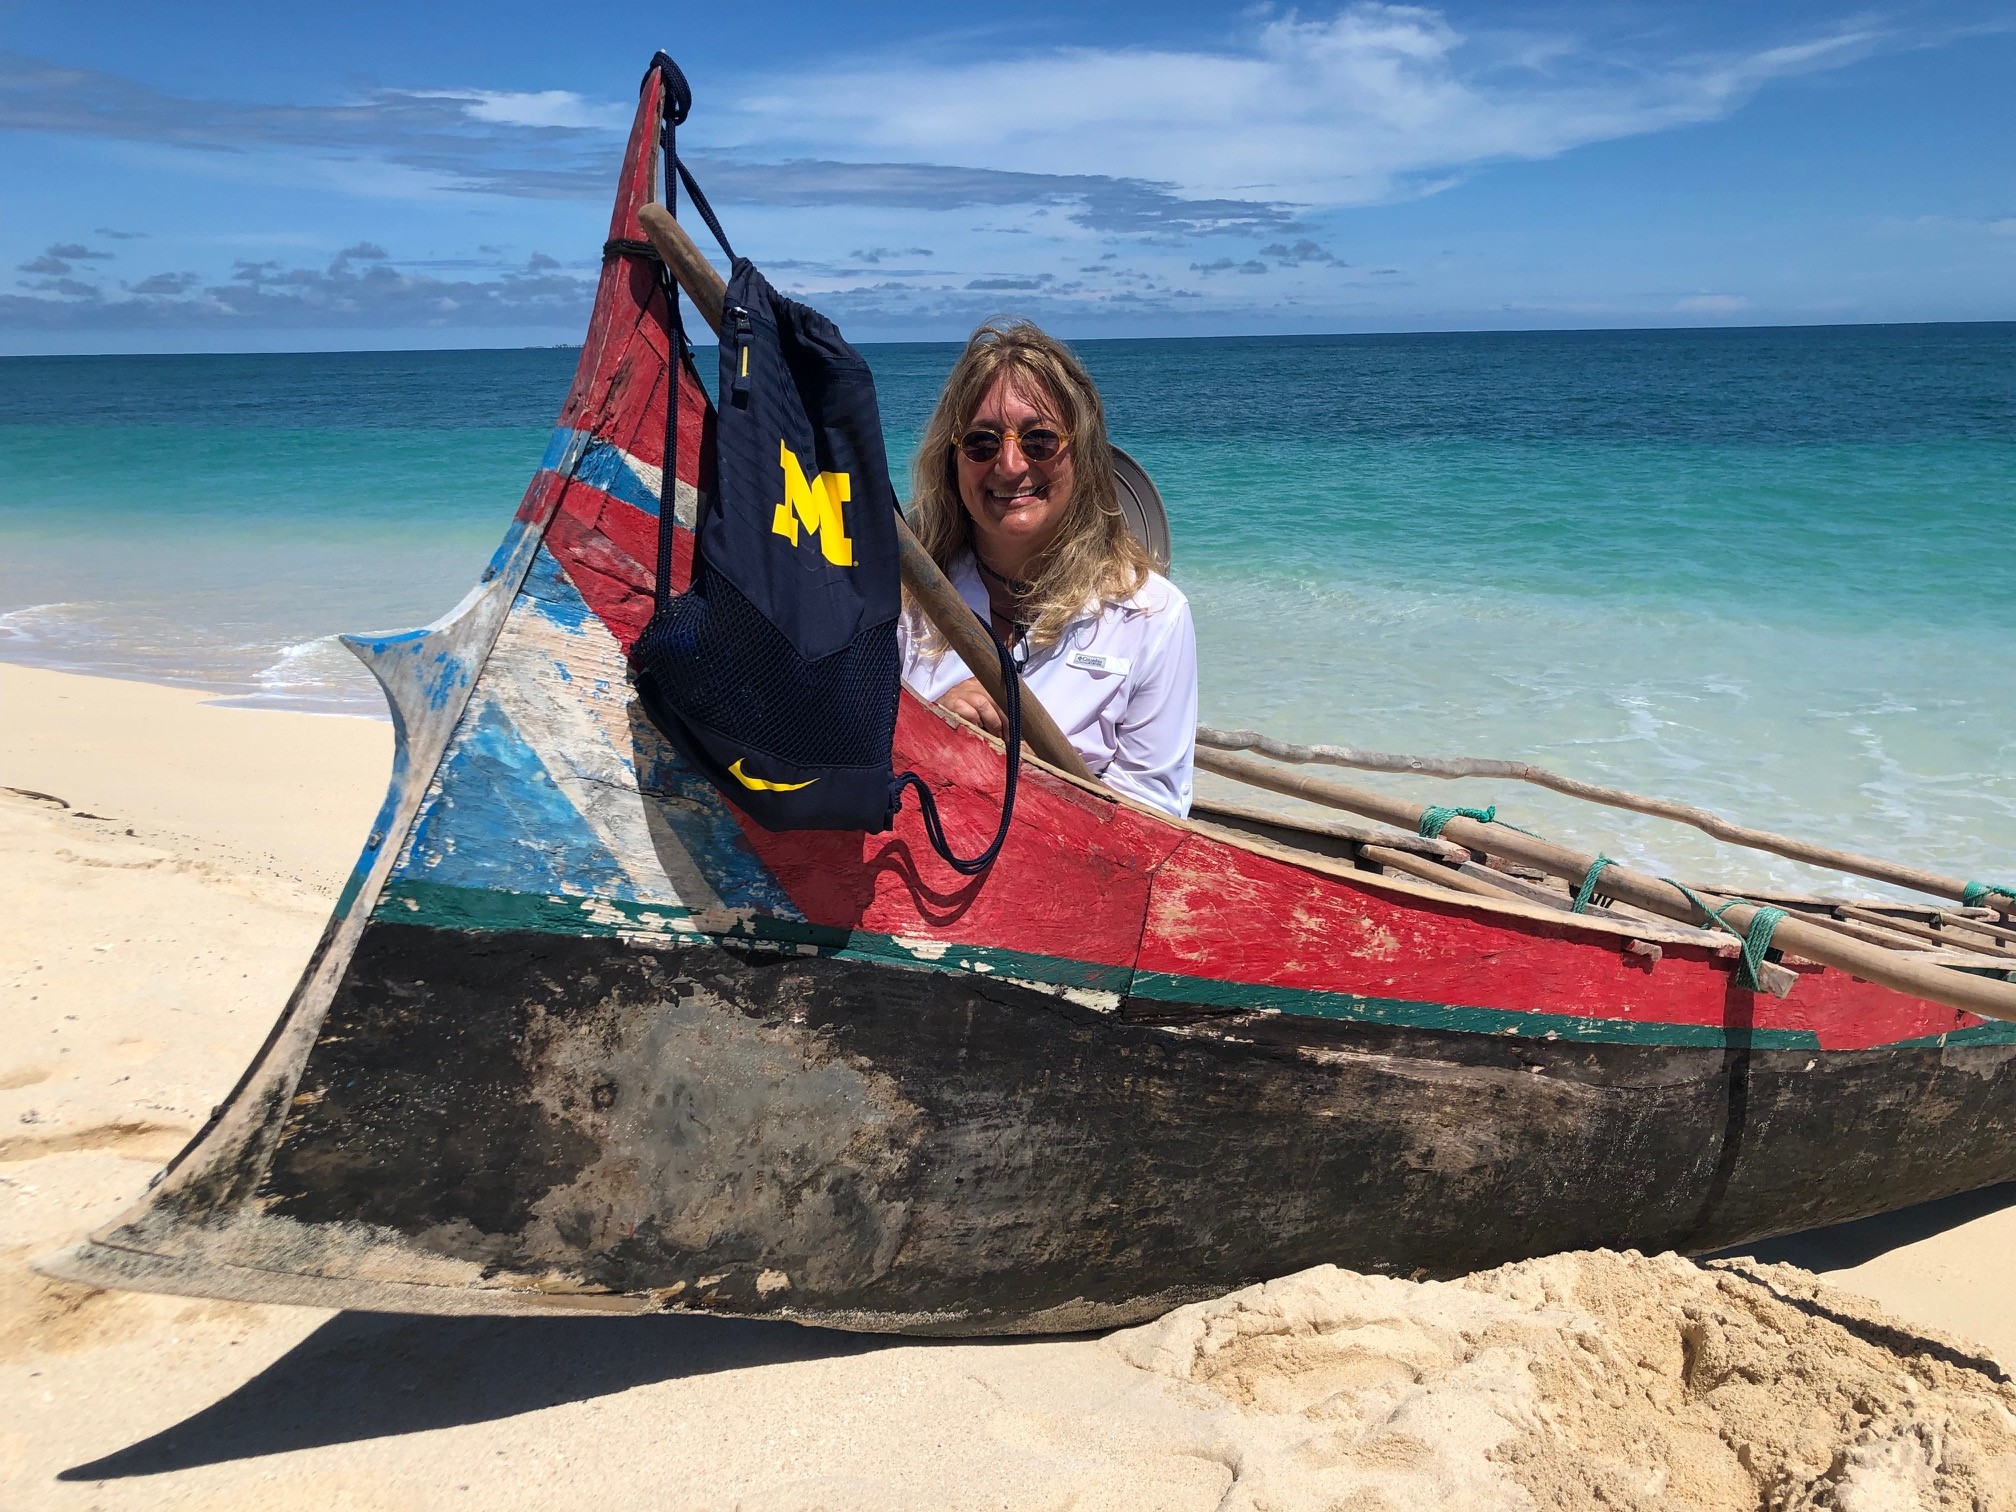 Former U-M regent Andrea Fischer Newman, ’79, visited the Barren Isles in the Mozambique Channel, about 15 miles off the coast of Madagascar.